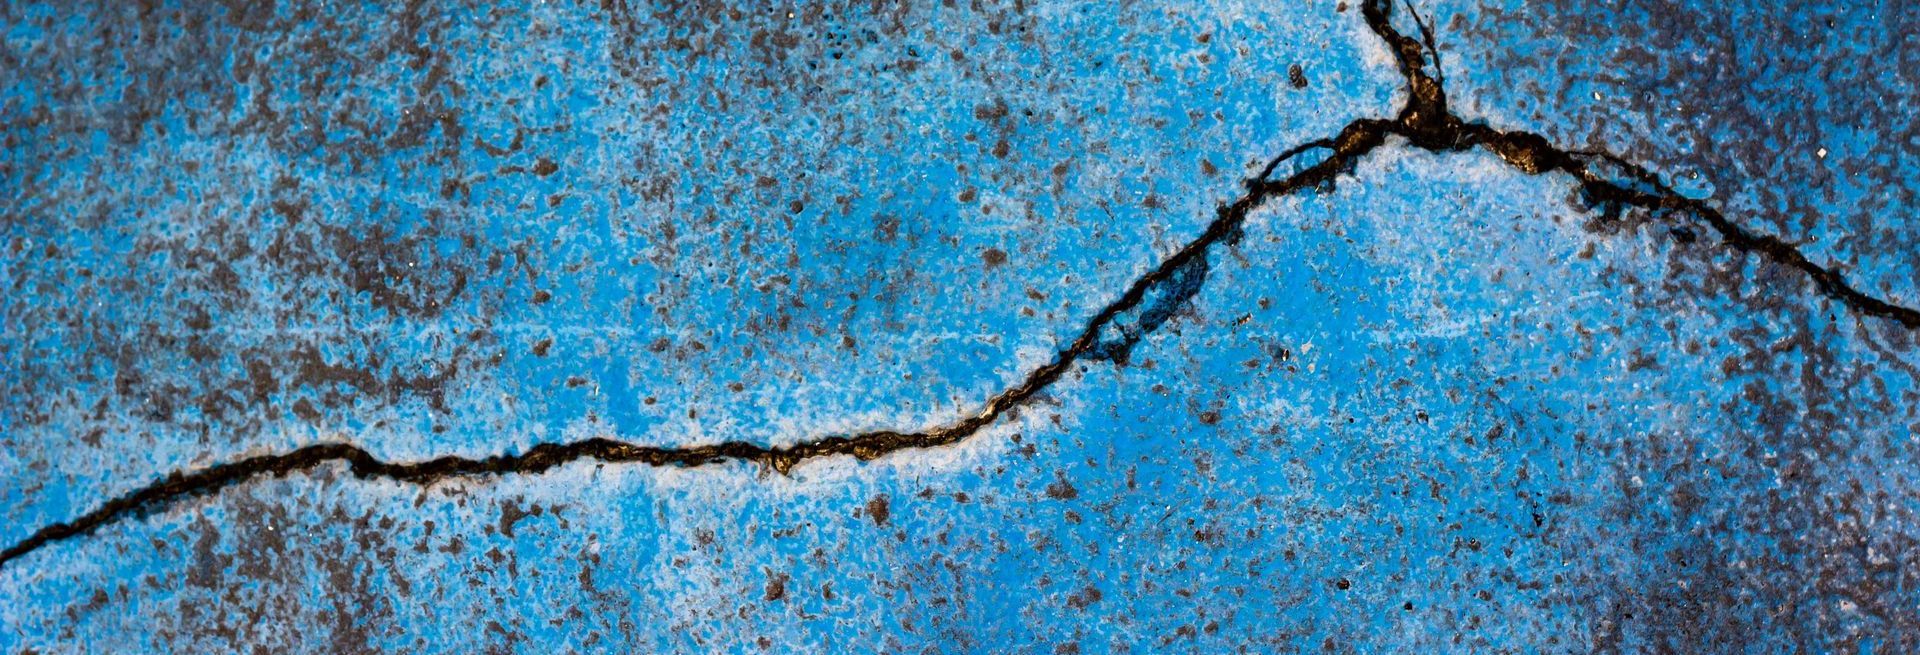 Cracked Concrete With Blue Color